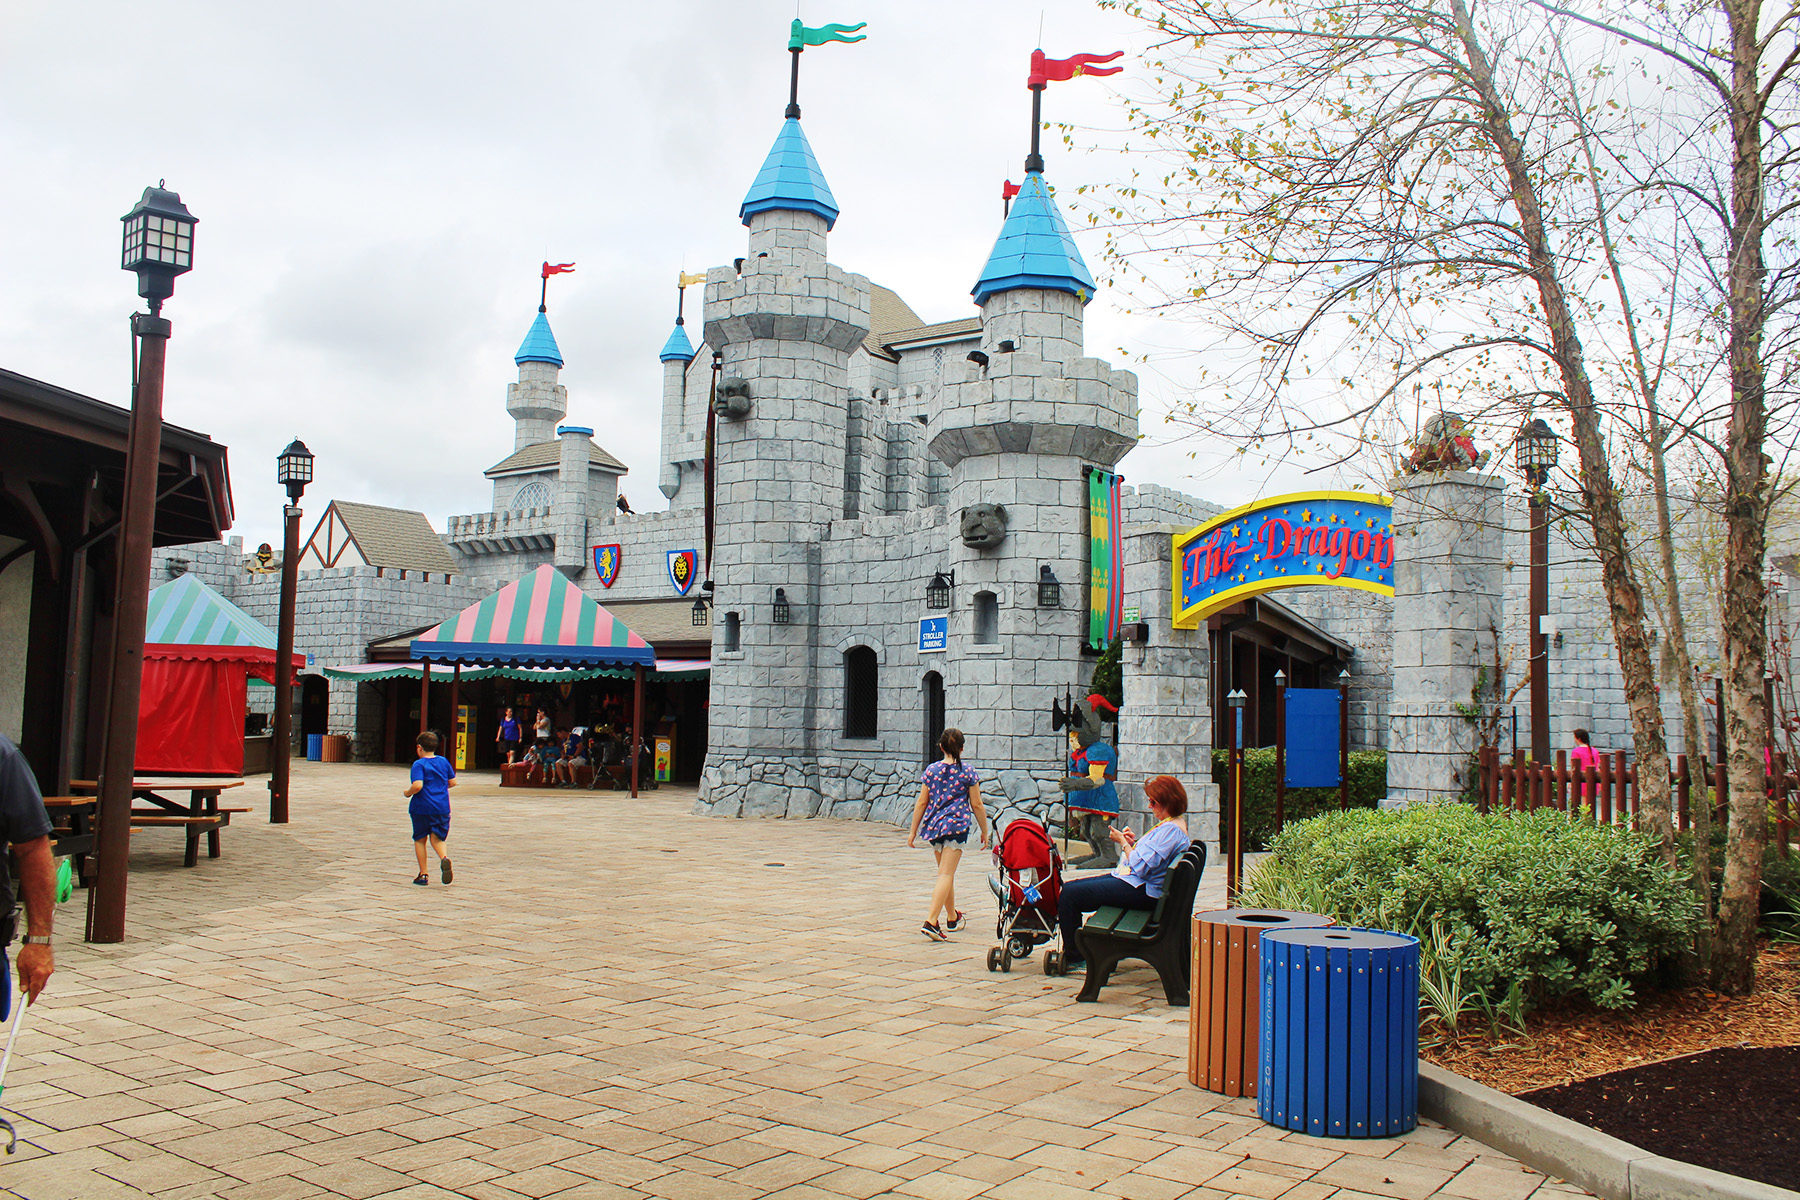 25 Things We Love About LEGOland Florida (in Winter Haven, FL)